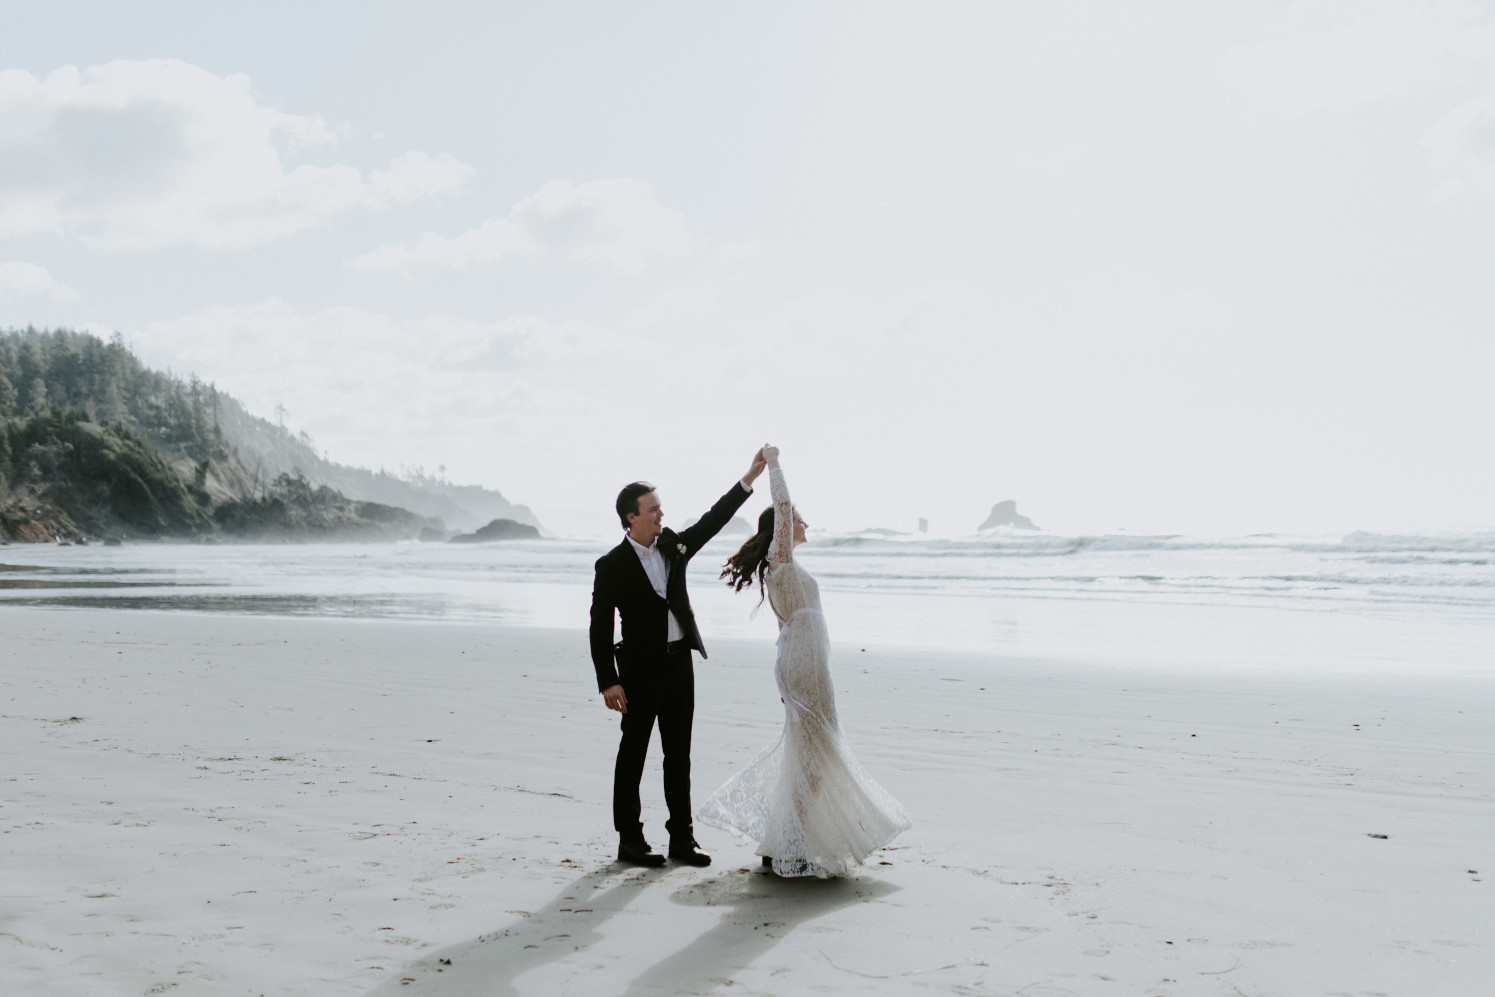 Nicole and Vlad dance on the beach. Elopement wedding photography at Cannon Beach by Sienna Plus Josh.